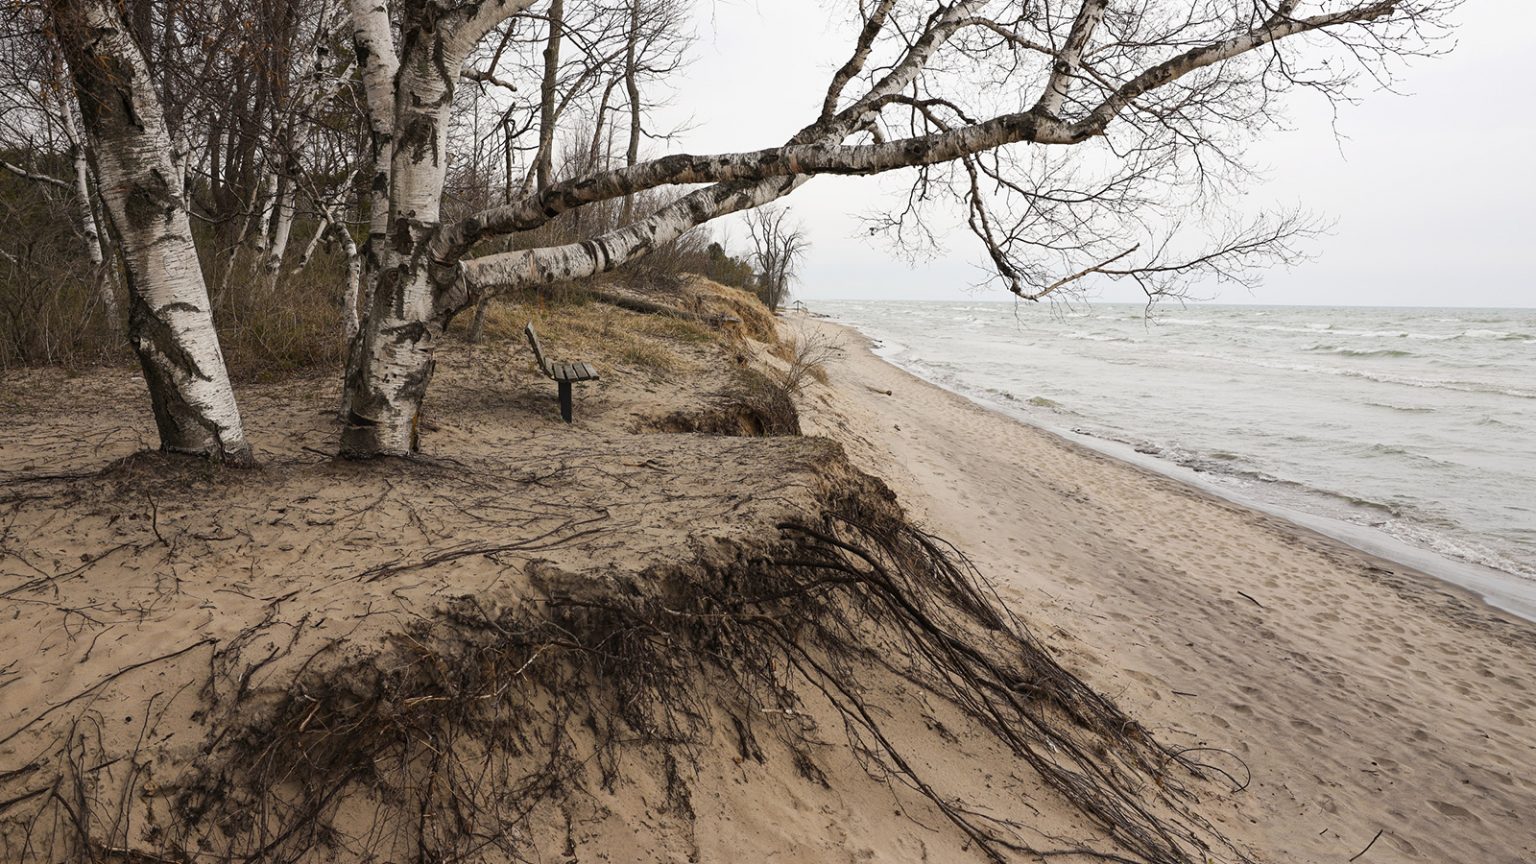 Park bench overlooking lakeshore and eroding sand beach with exposed roots